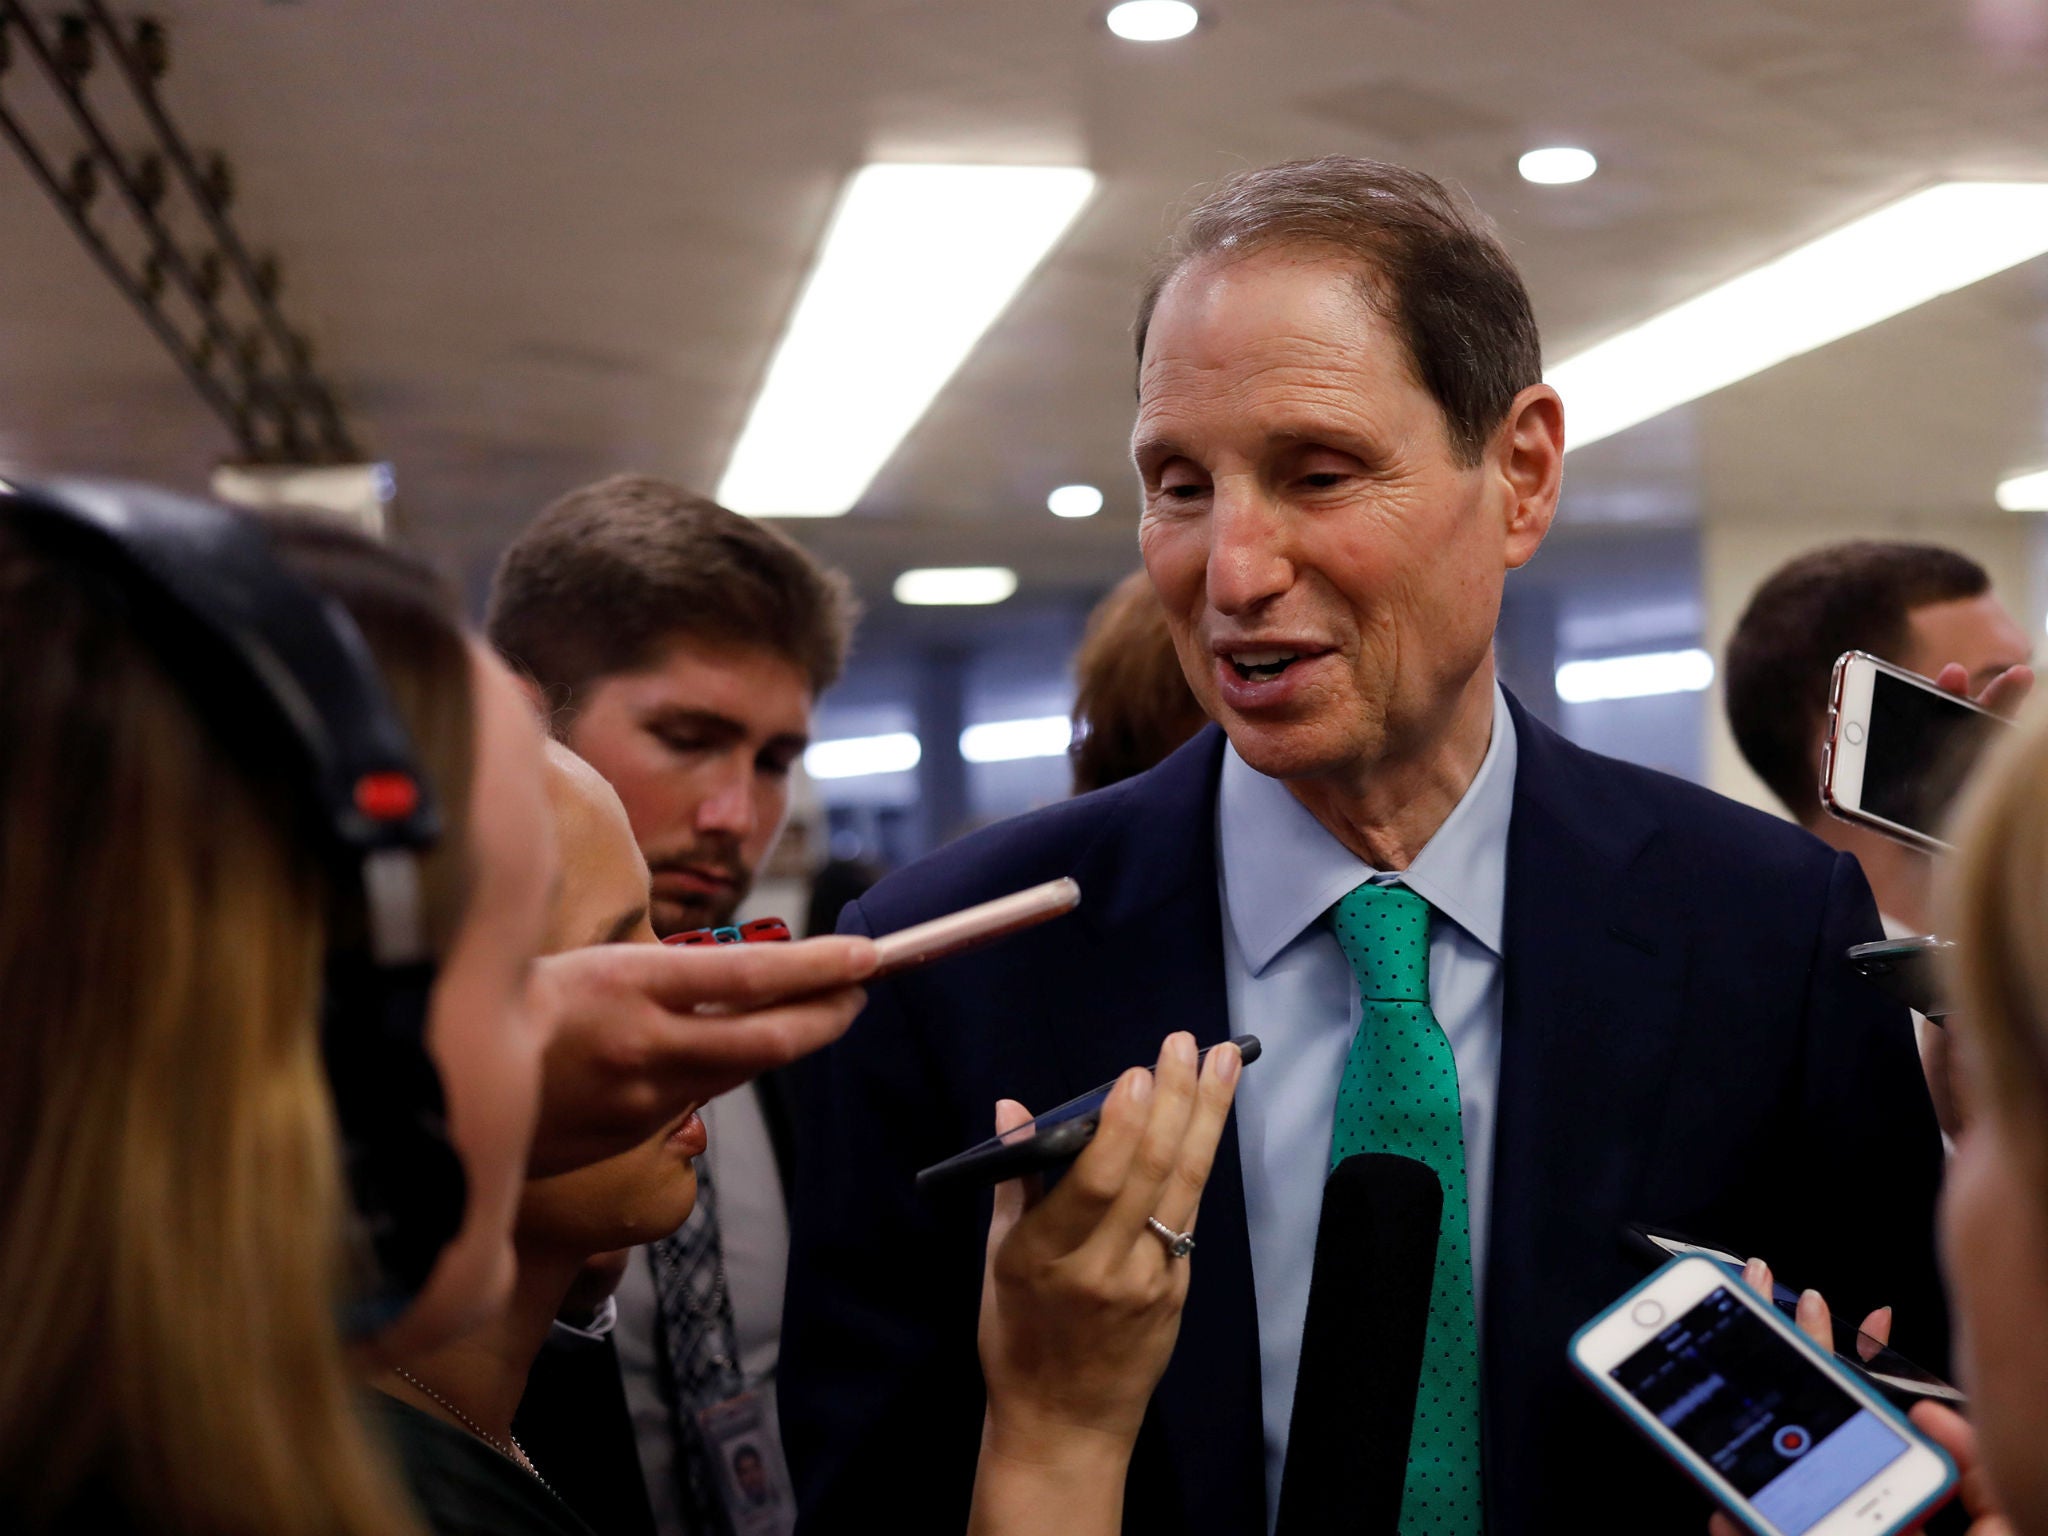 Oregon Democrat Ron Wyden, seen here on Capitol Hill in Washington on August 1, 2017, wants to limit how the government can read Americans' communications